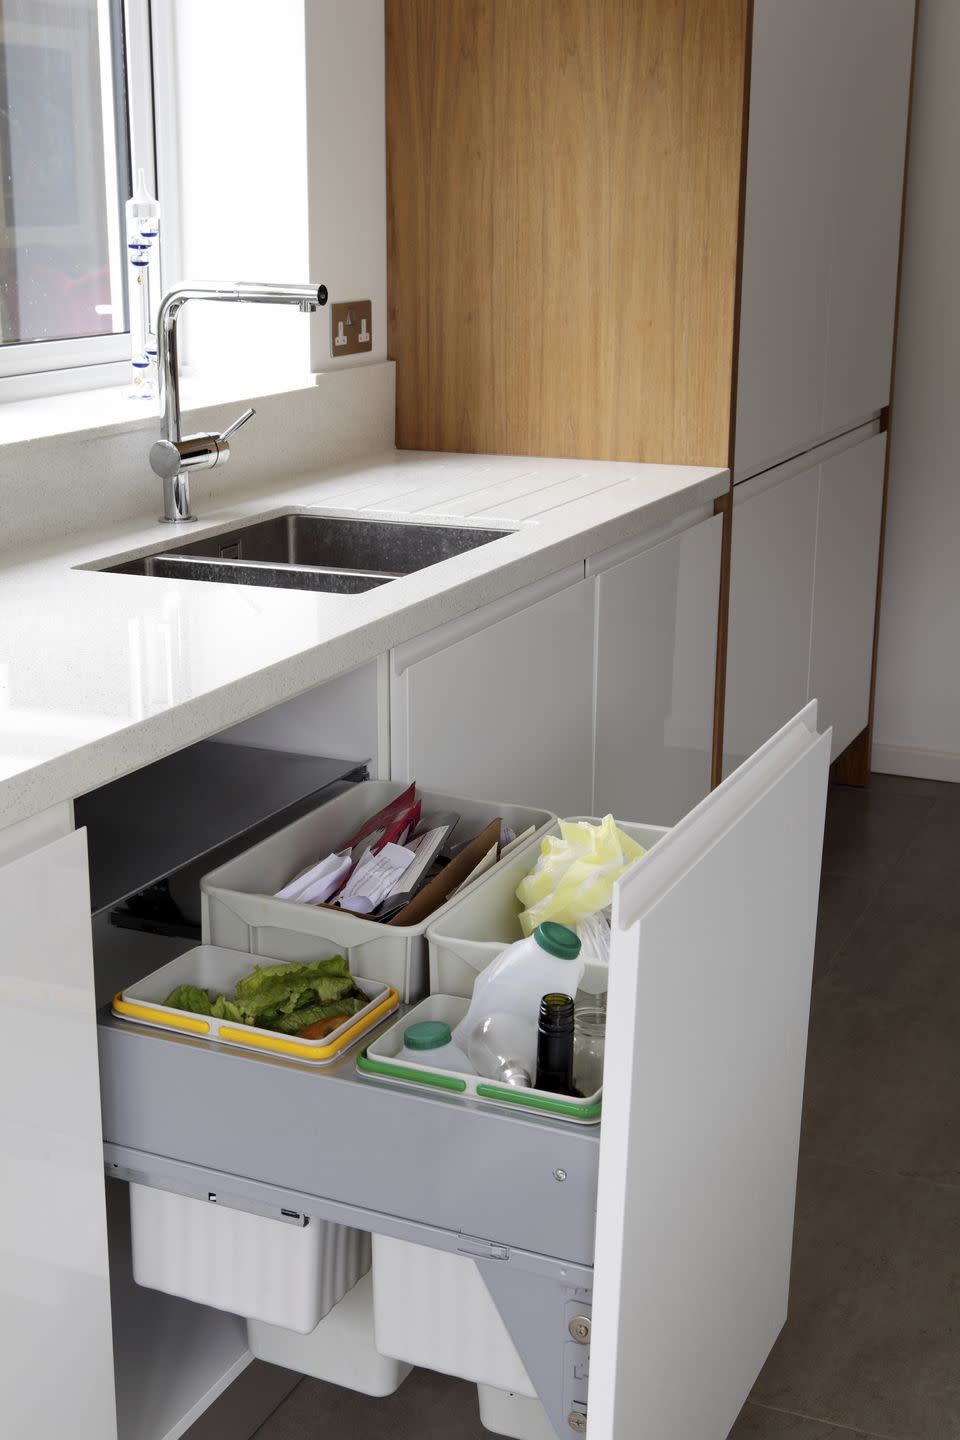 Keep Trash In A Pull-Out Drawer